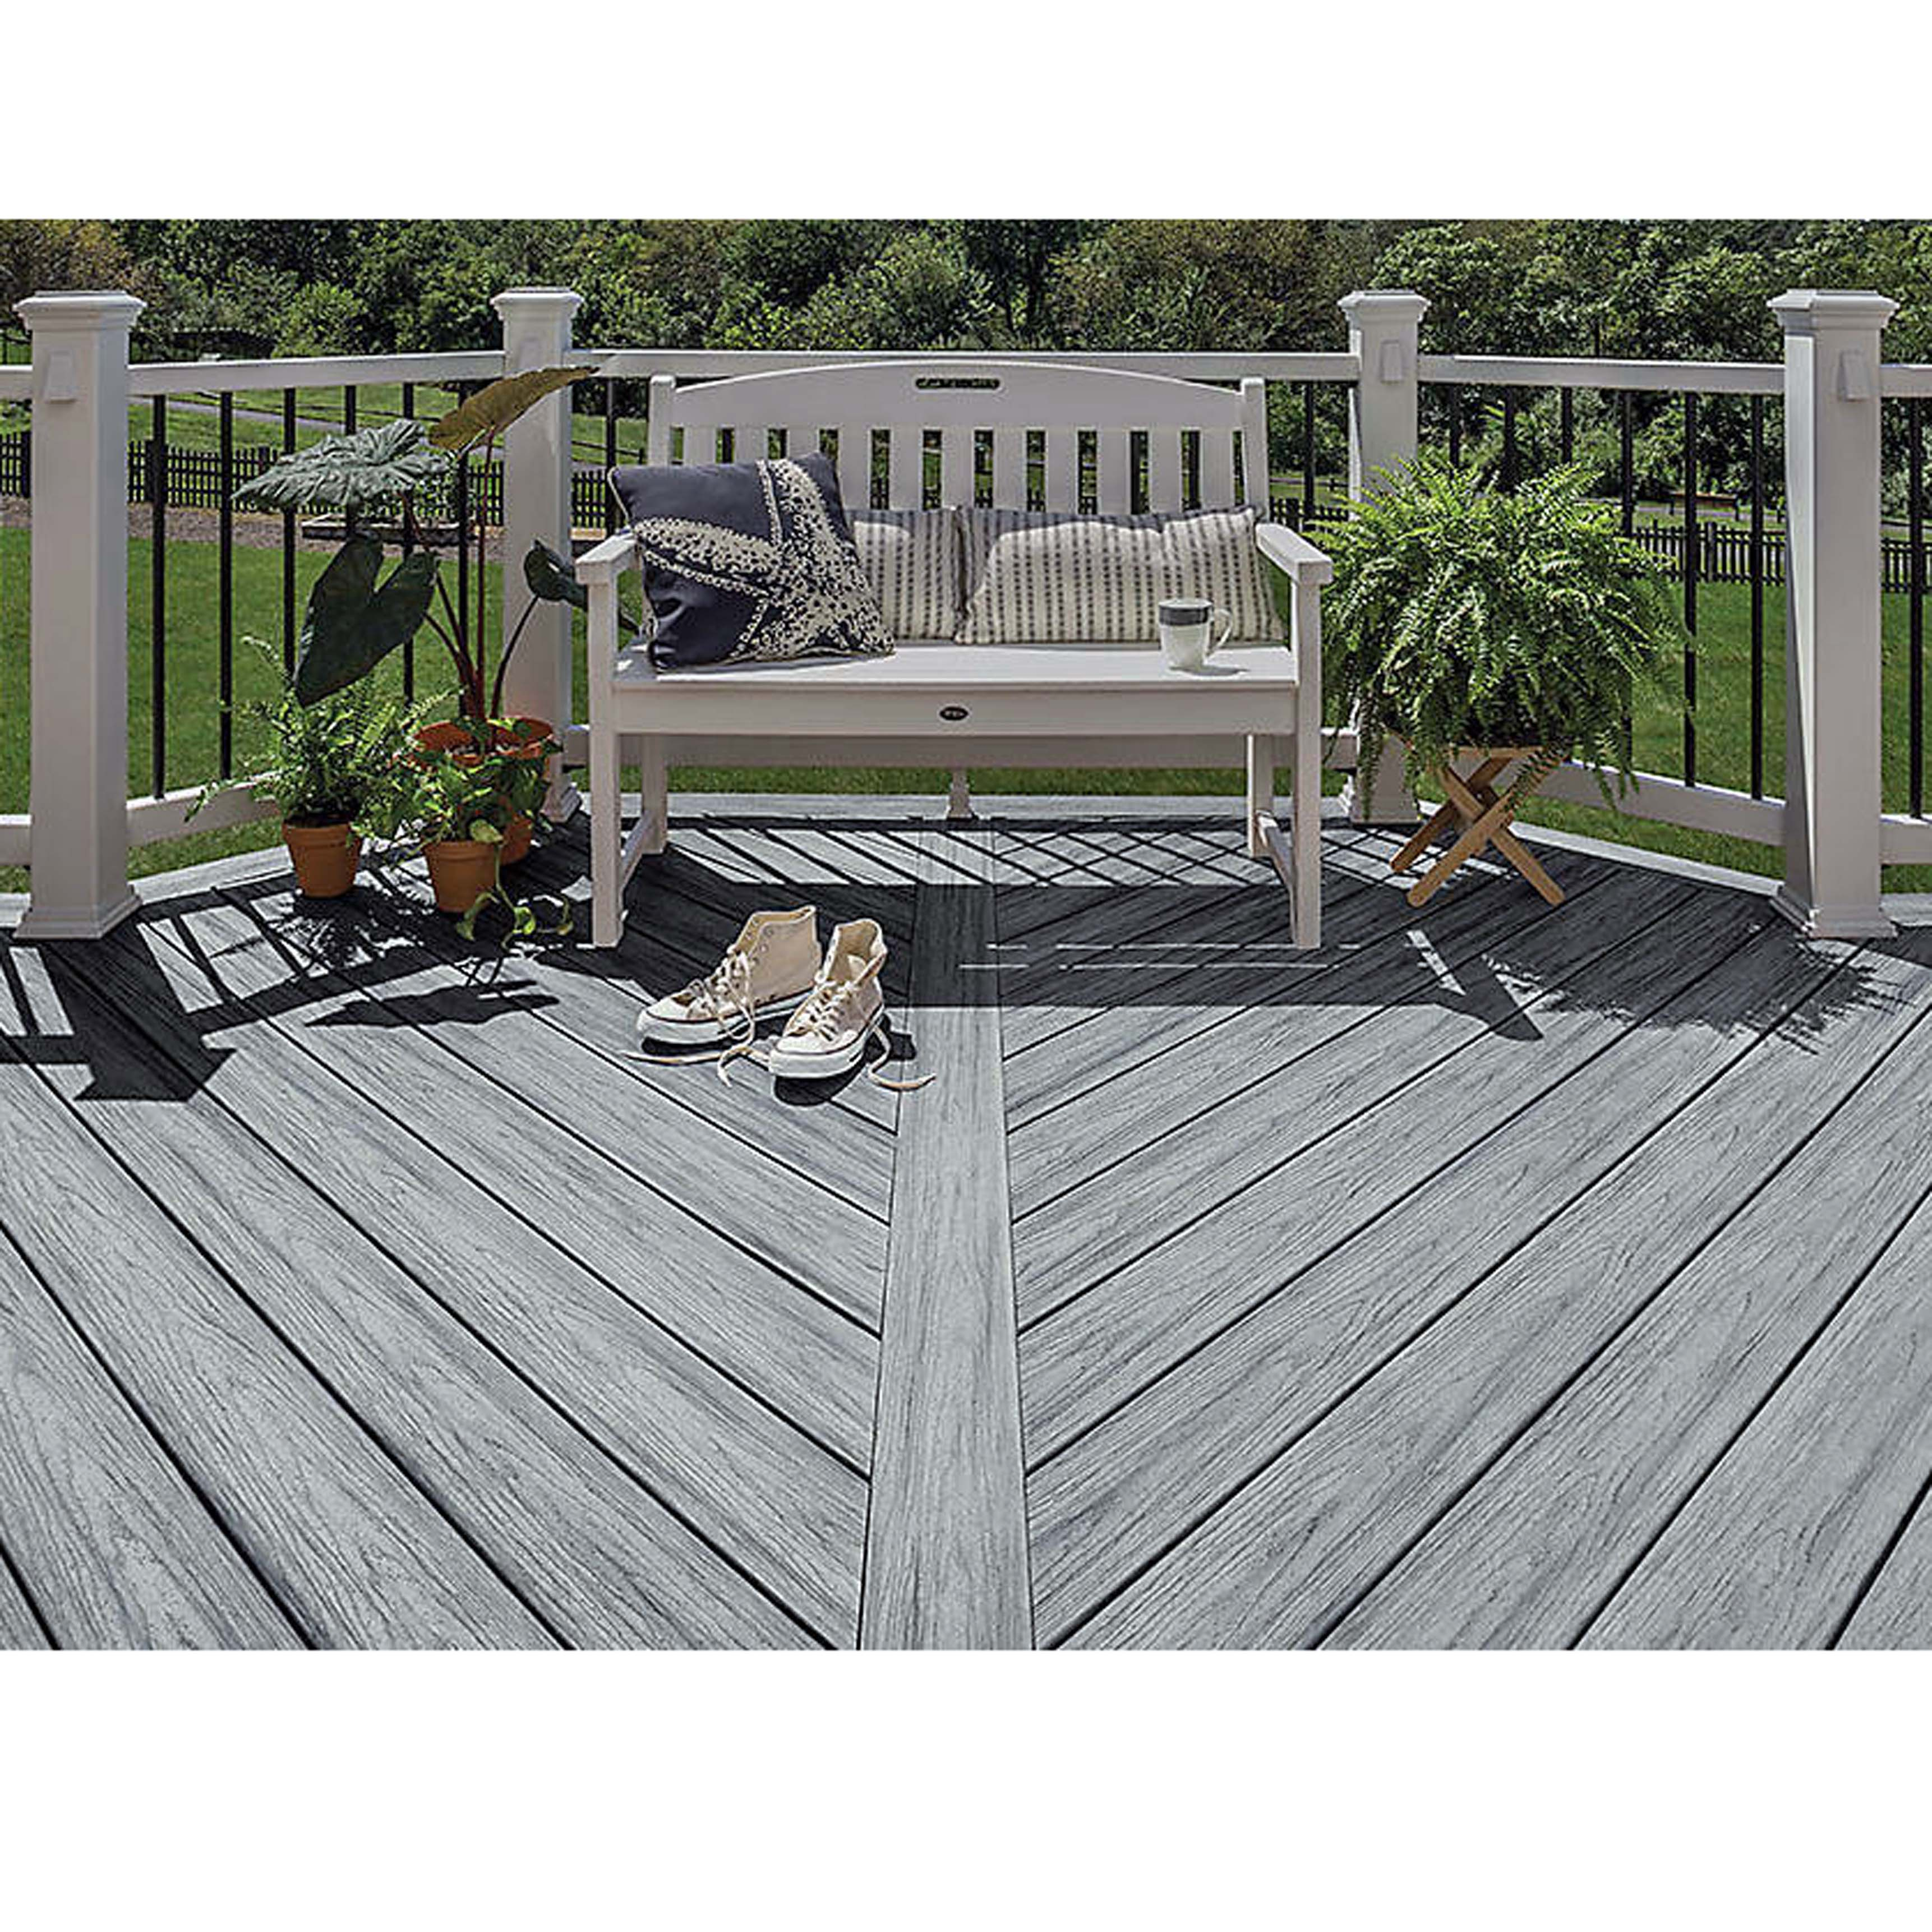 Trex Enhanced Naturals Composite Decking Capitol City Lumber intended for dimensions 3445 X 3445